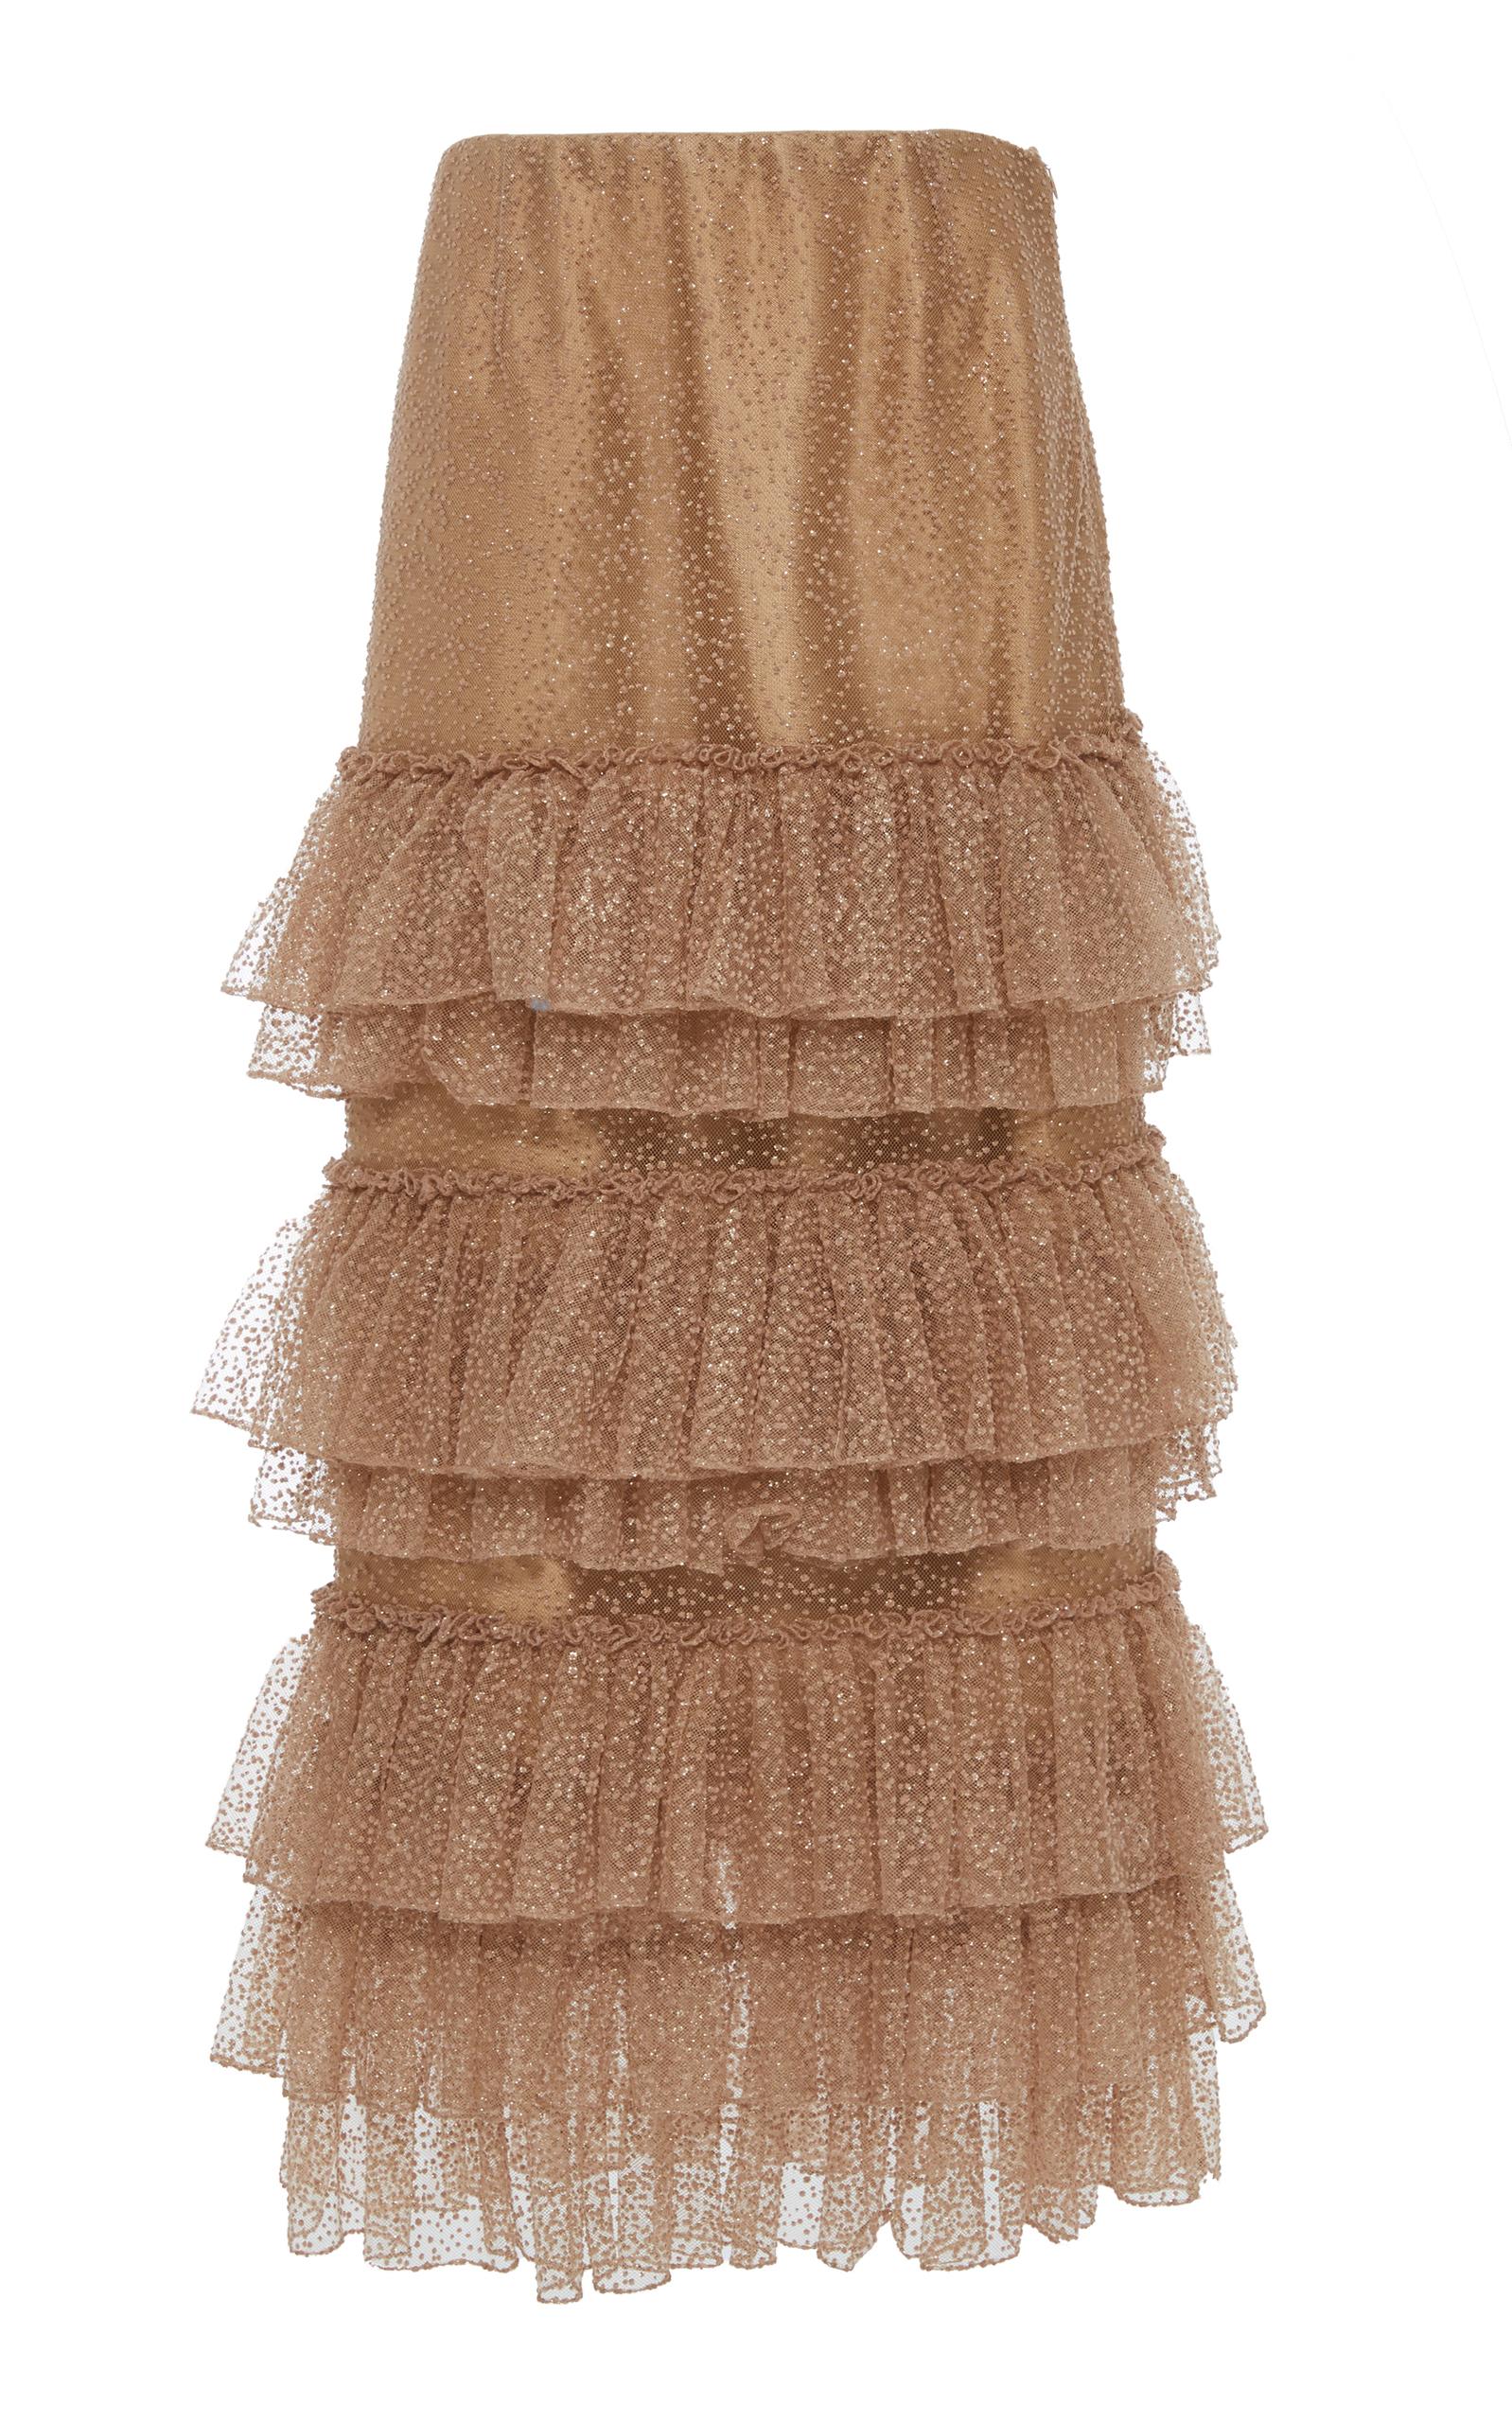 Rosie Assoulin No More Tiers Skirt In Neutral | ModeSens